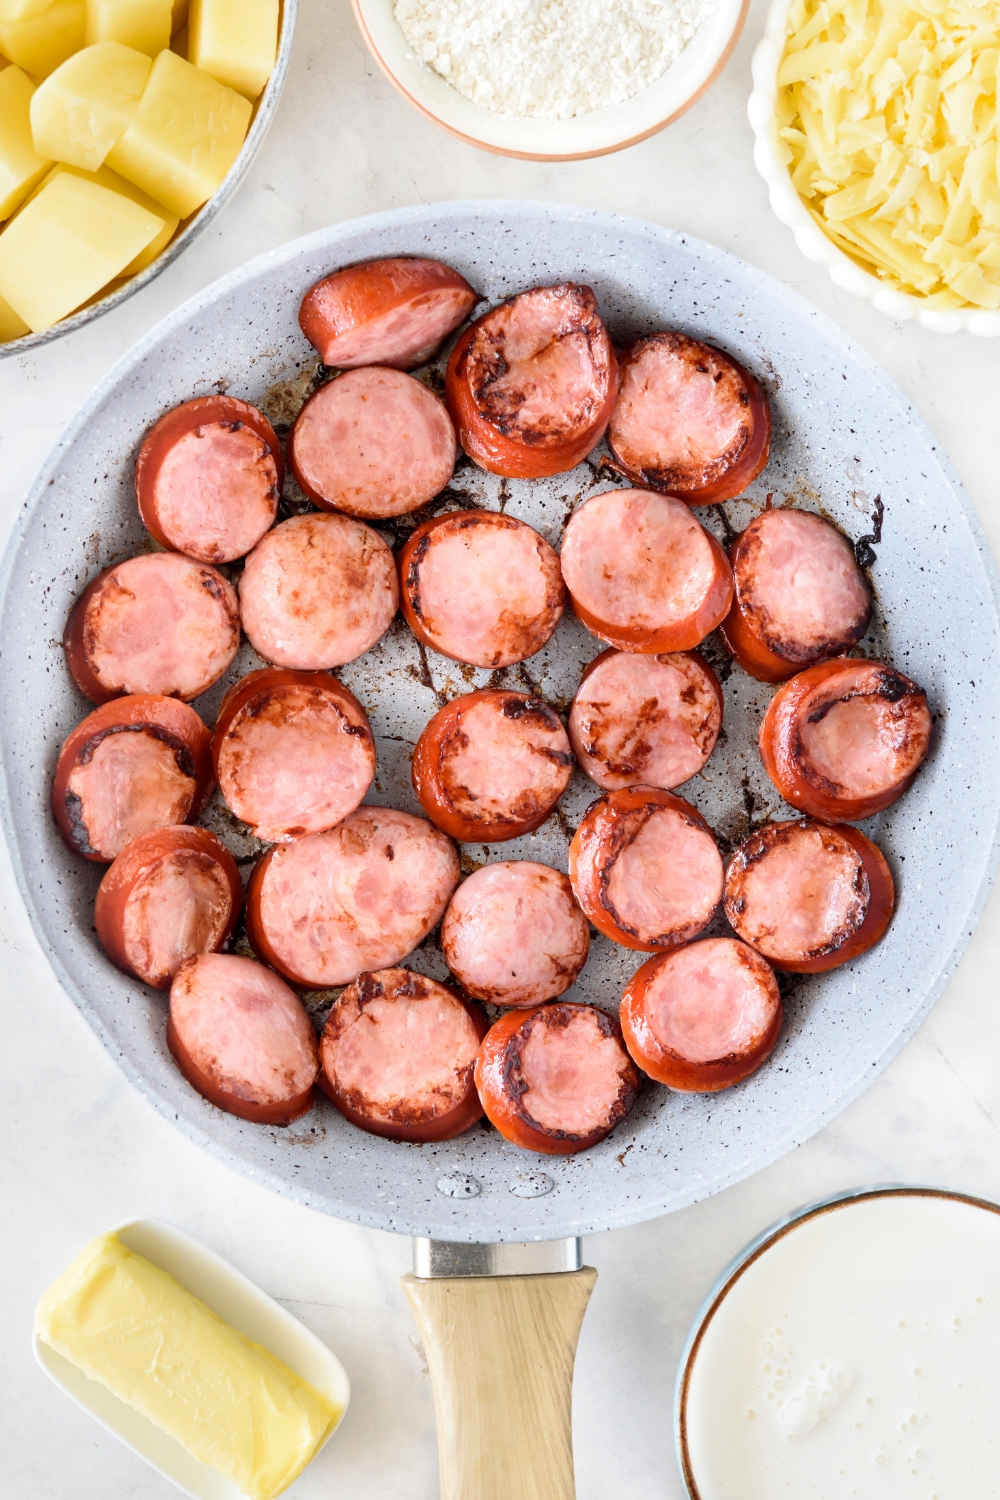 A skillet filled with sausages that have been browned.